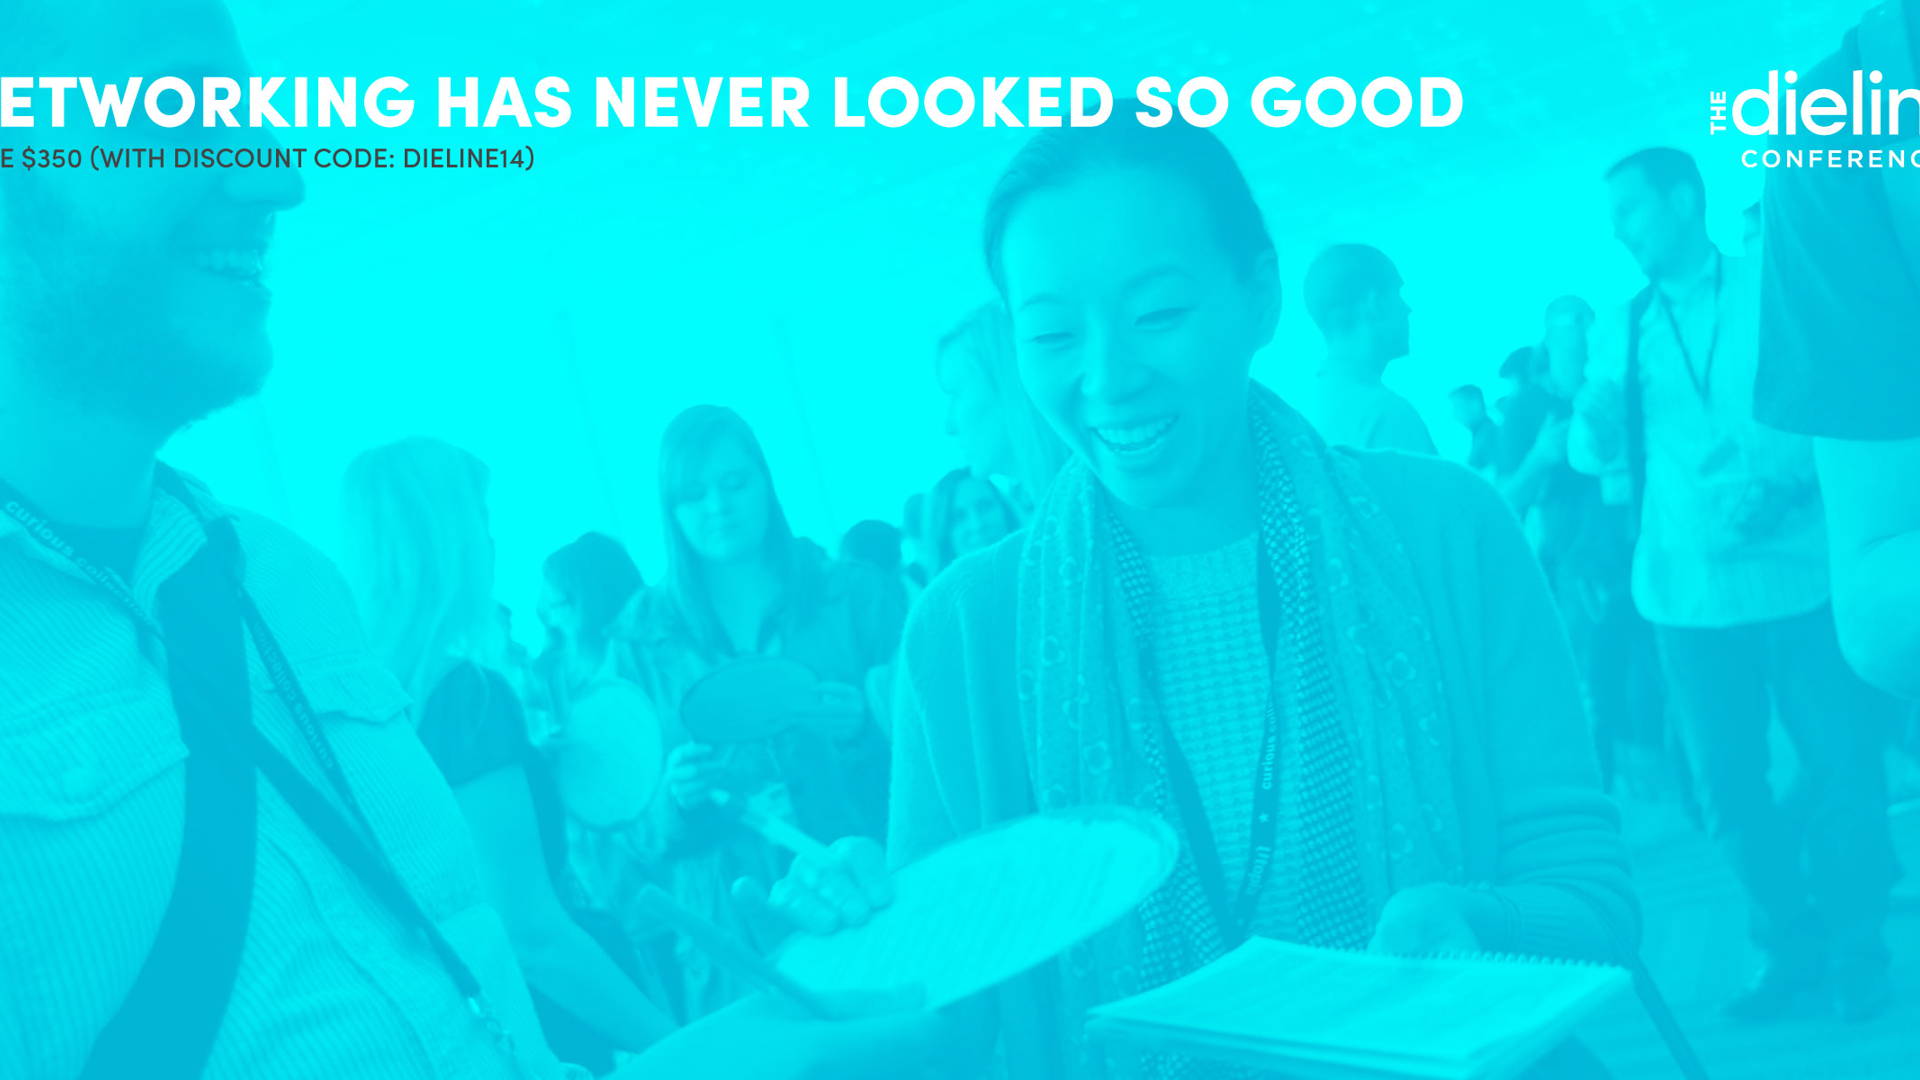 Featured image for The Dieline Conference: Networking Has Never Looked So Good